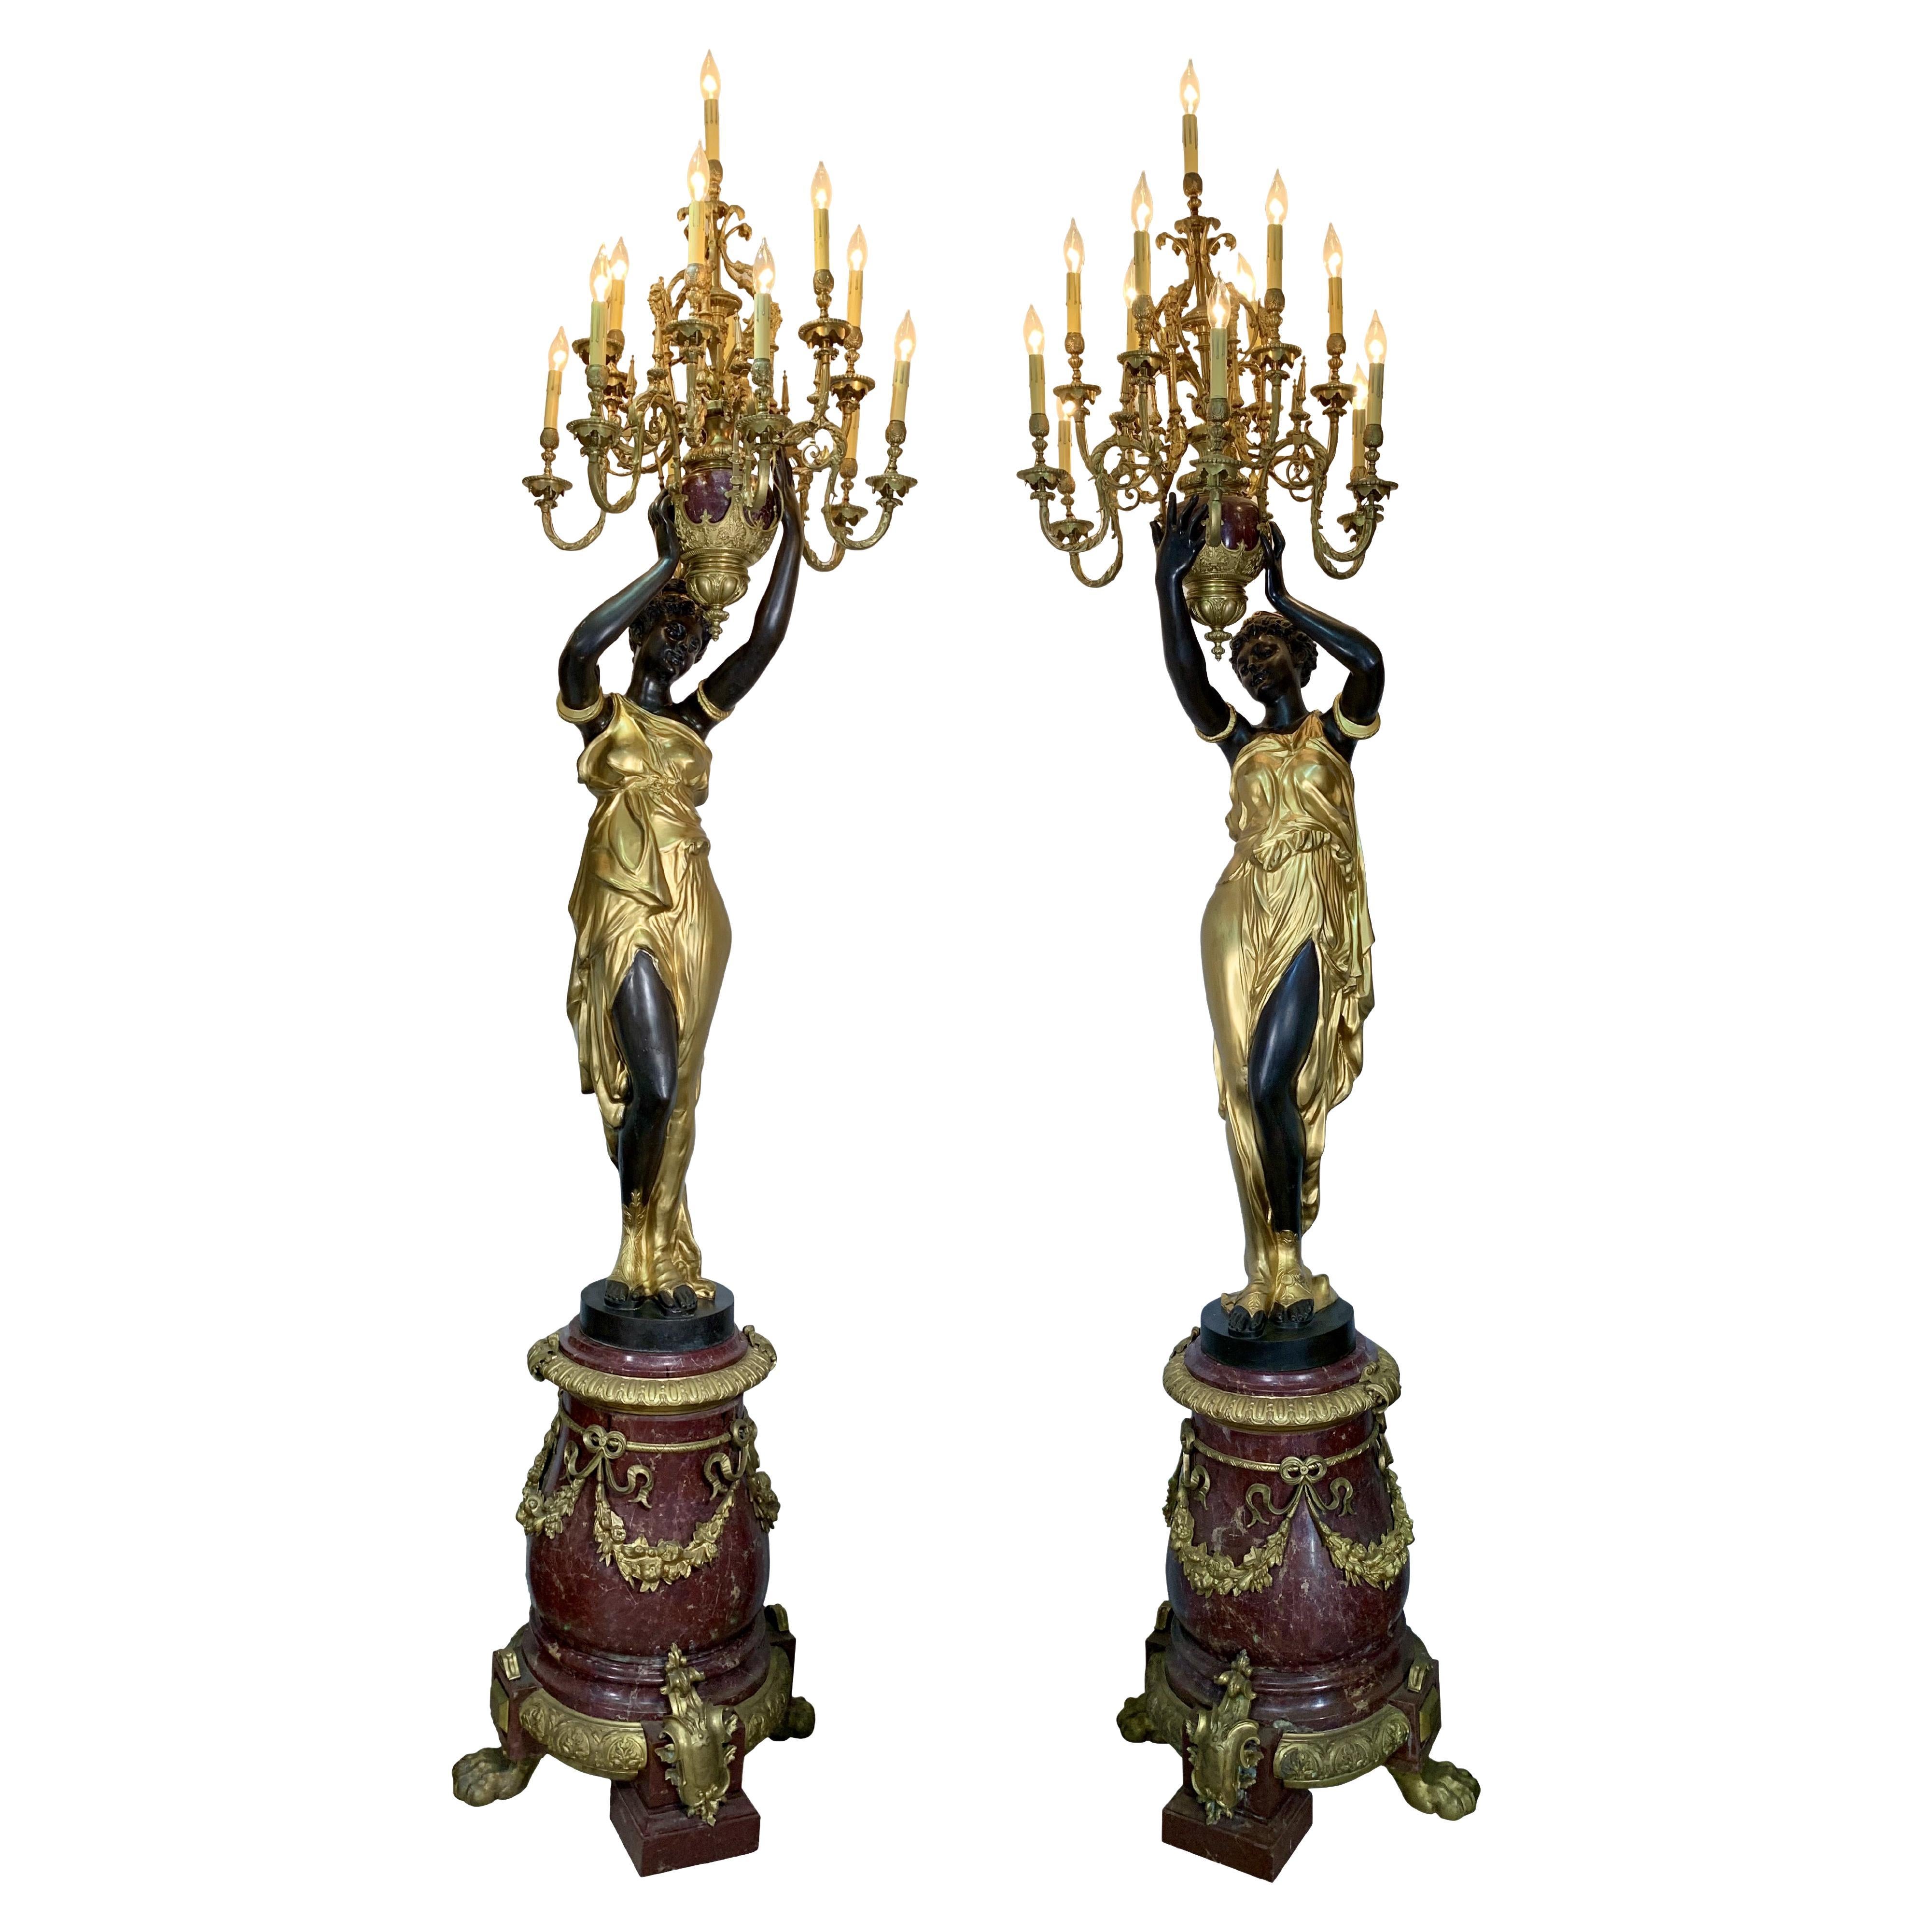 Pair of Monumental French Gilt and Patinated Bronze and Rouge Marble Torcheres